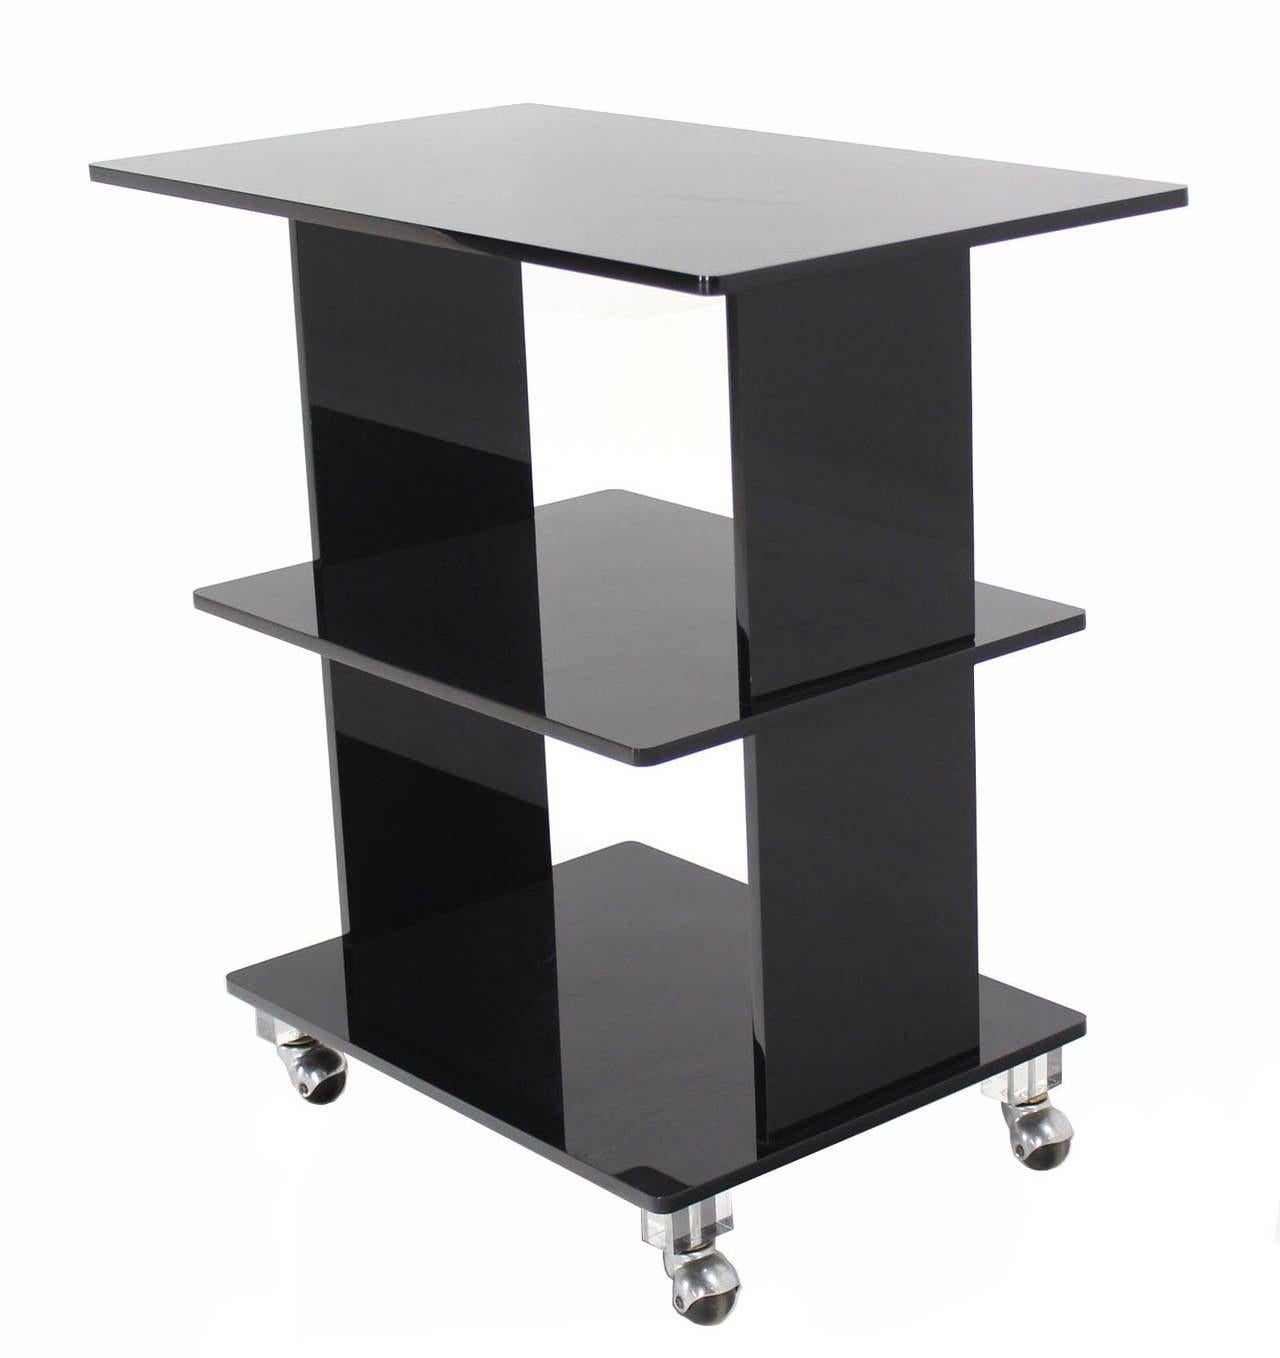 Mid century modern dark lucite serving rolling table mini etagere bookcase on wheels.